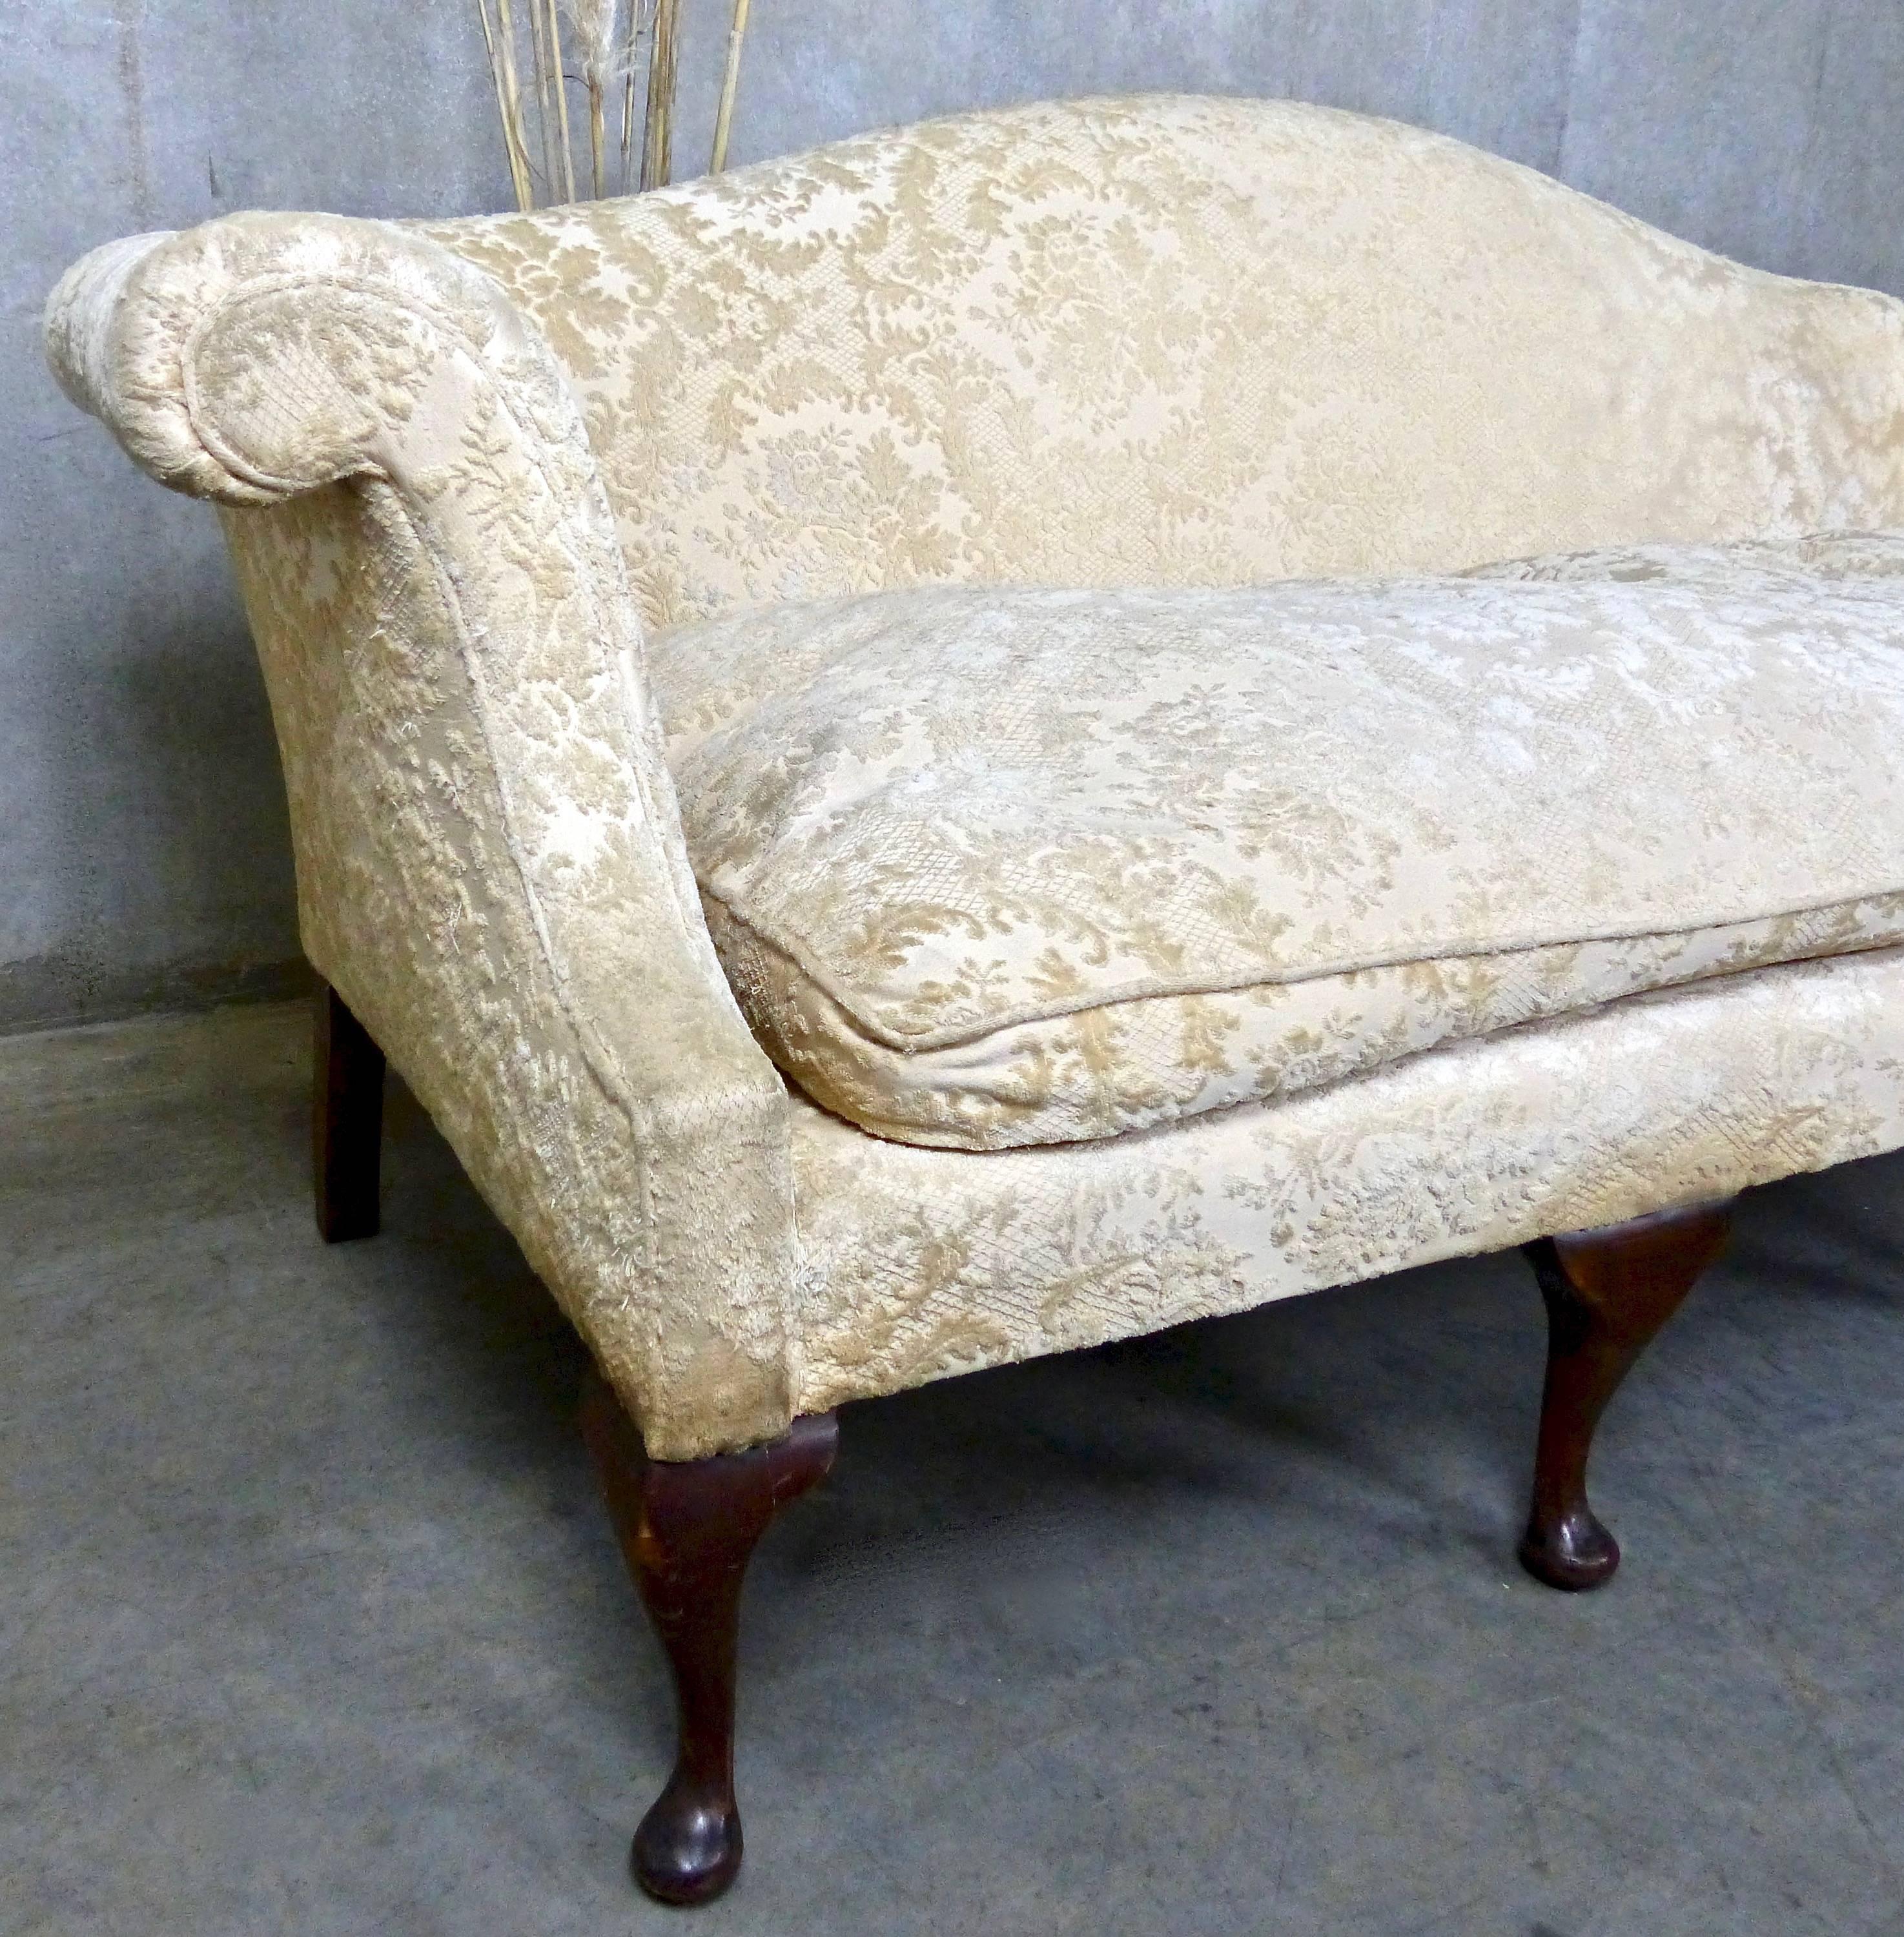 Chippendale Revival sofa with characteristic camel-shaped back and cabriole legs. Currently upholstered in an early and luxurious cut velvet that’s been well loved by its original NYC owners.
Four cabriole legs in front; two straight legs in back.